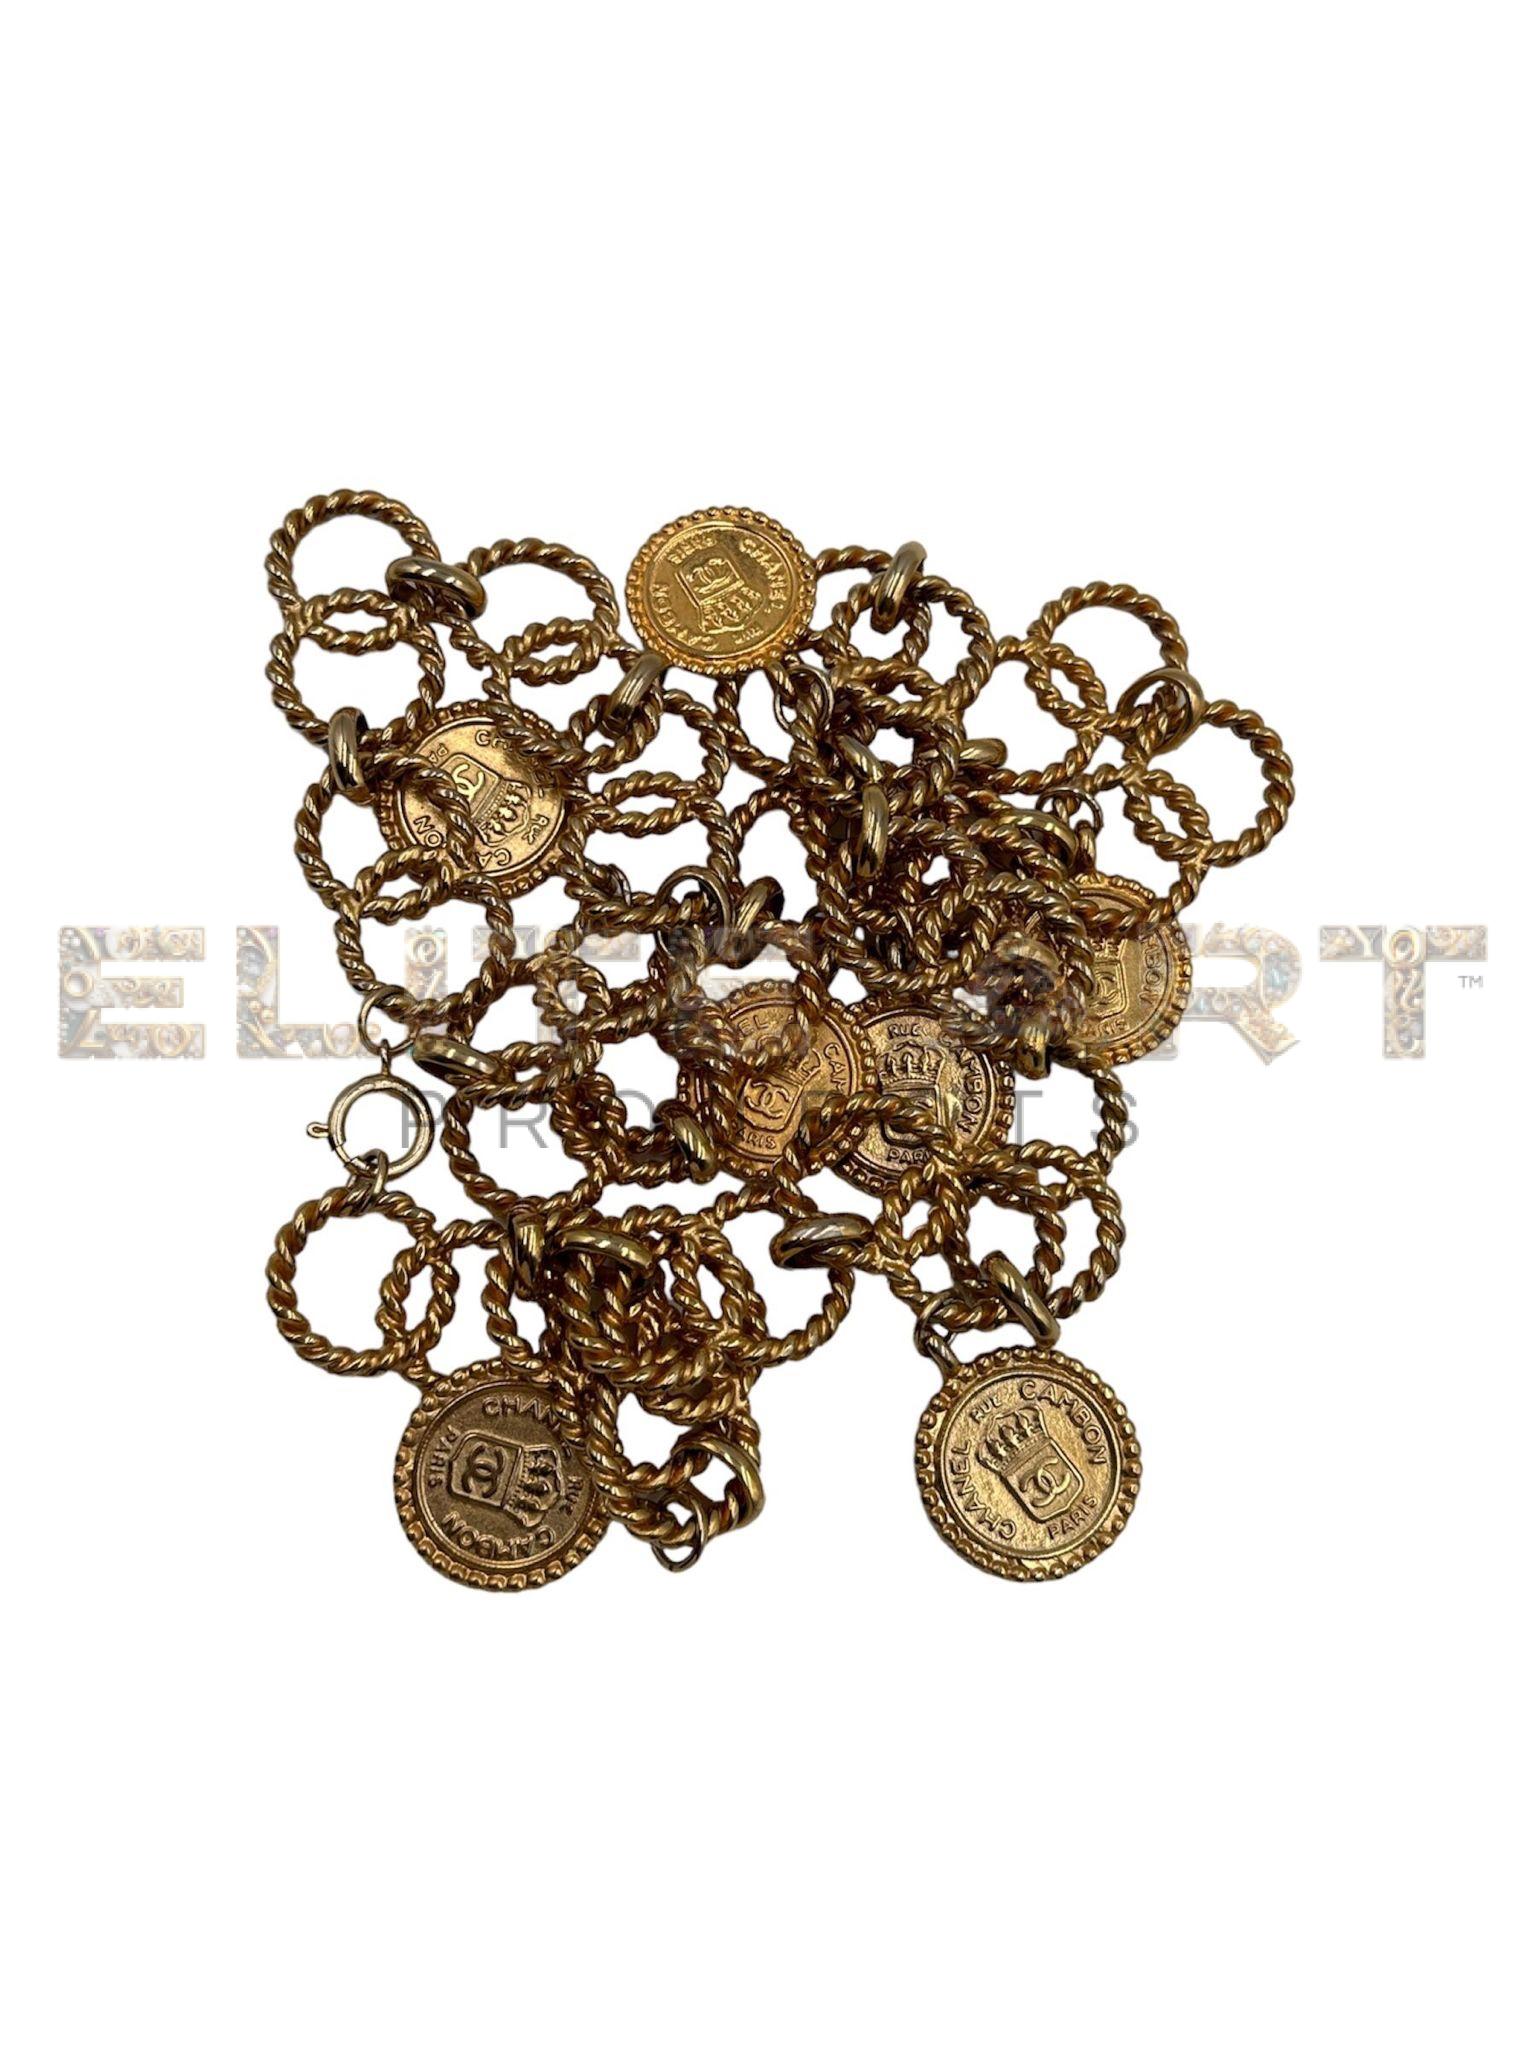 Chanel,necklace,gold-plated metal,coin charms,"CHANEL CAMBON" logo charms,100 cm length